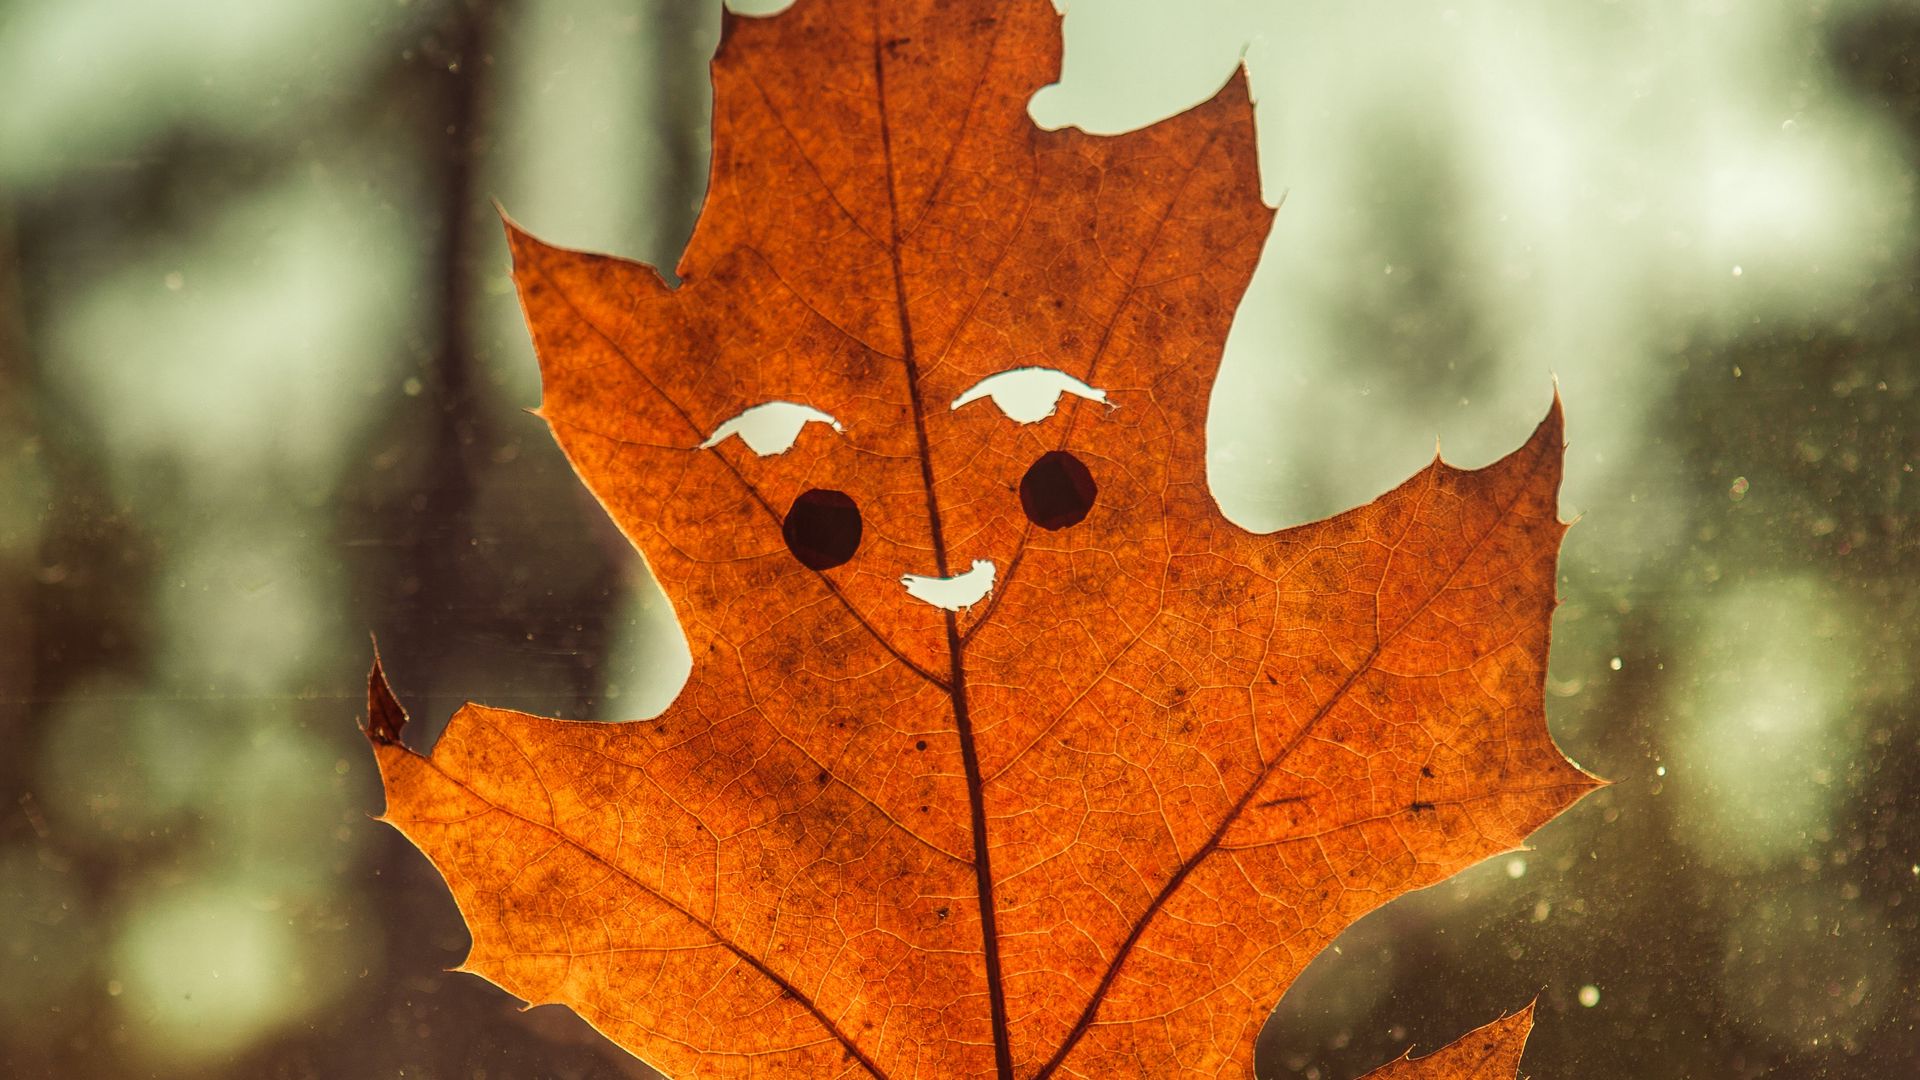 Download wallpaper 1920x1080 leaf, funny, autumn, smile full hd, hdtv, fhd,  1080p hd background